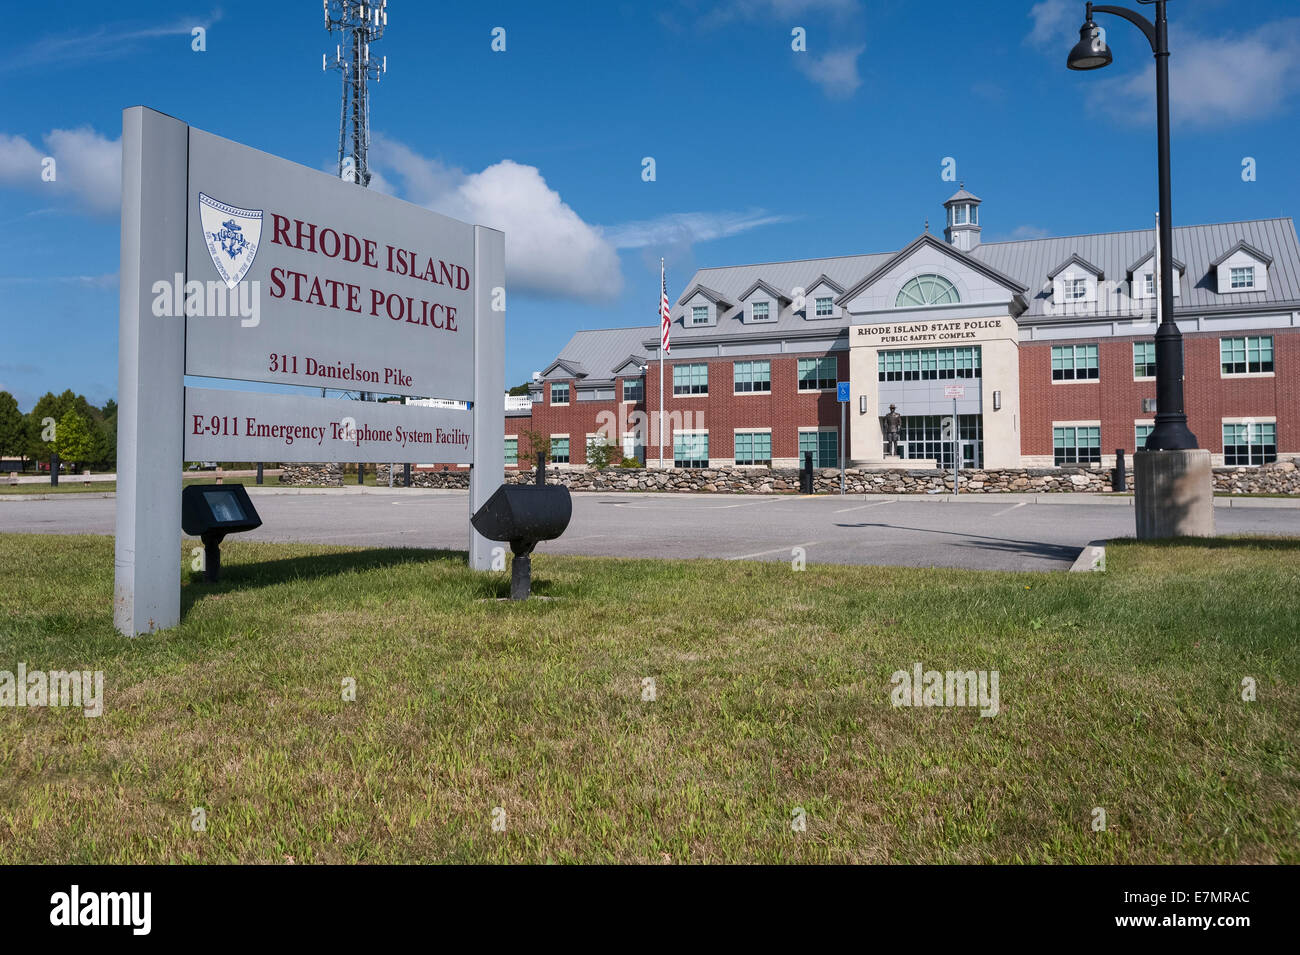 Rhode Island State Police Public Safety Complex located on Danielson